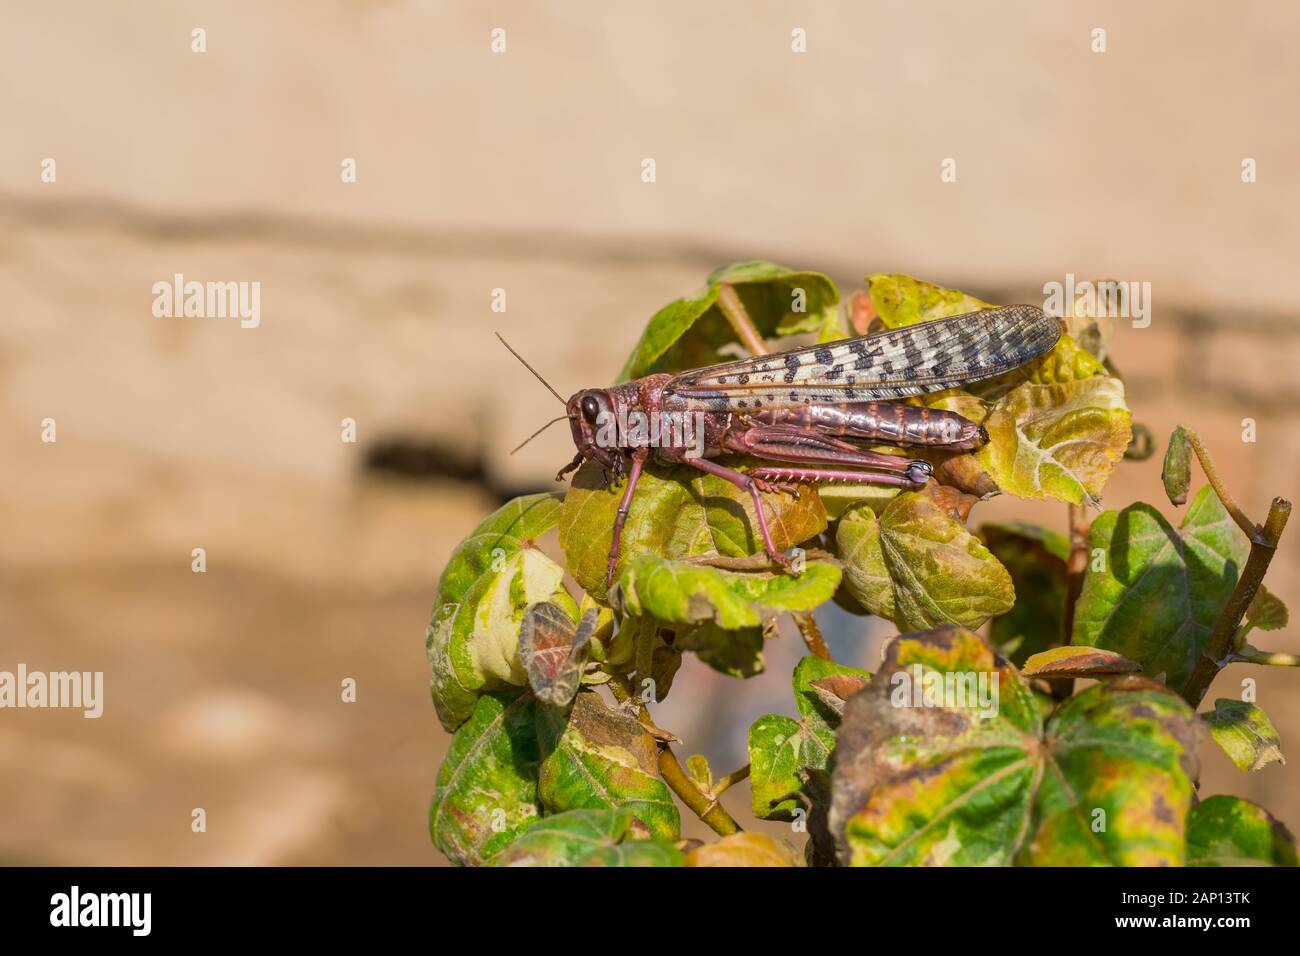 close up of a desert locust in pink color sitting on a branch of a plant. Stock Photo